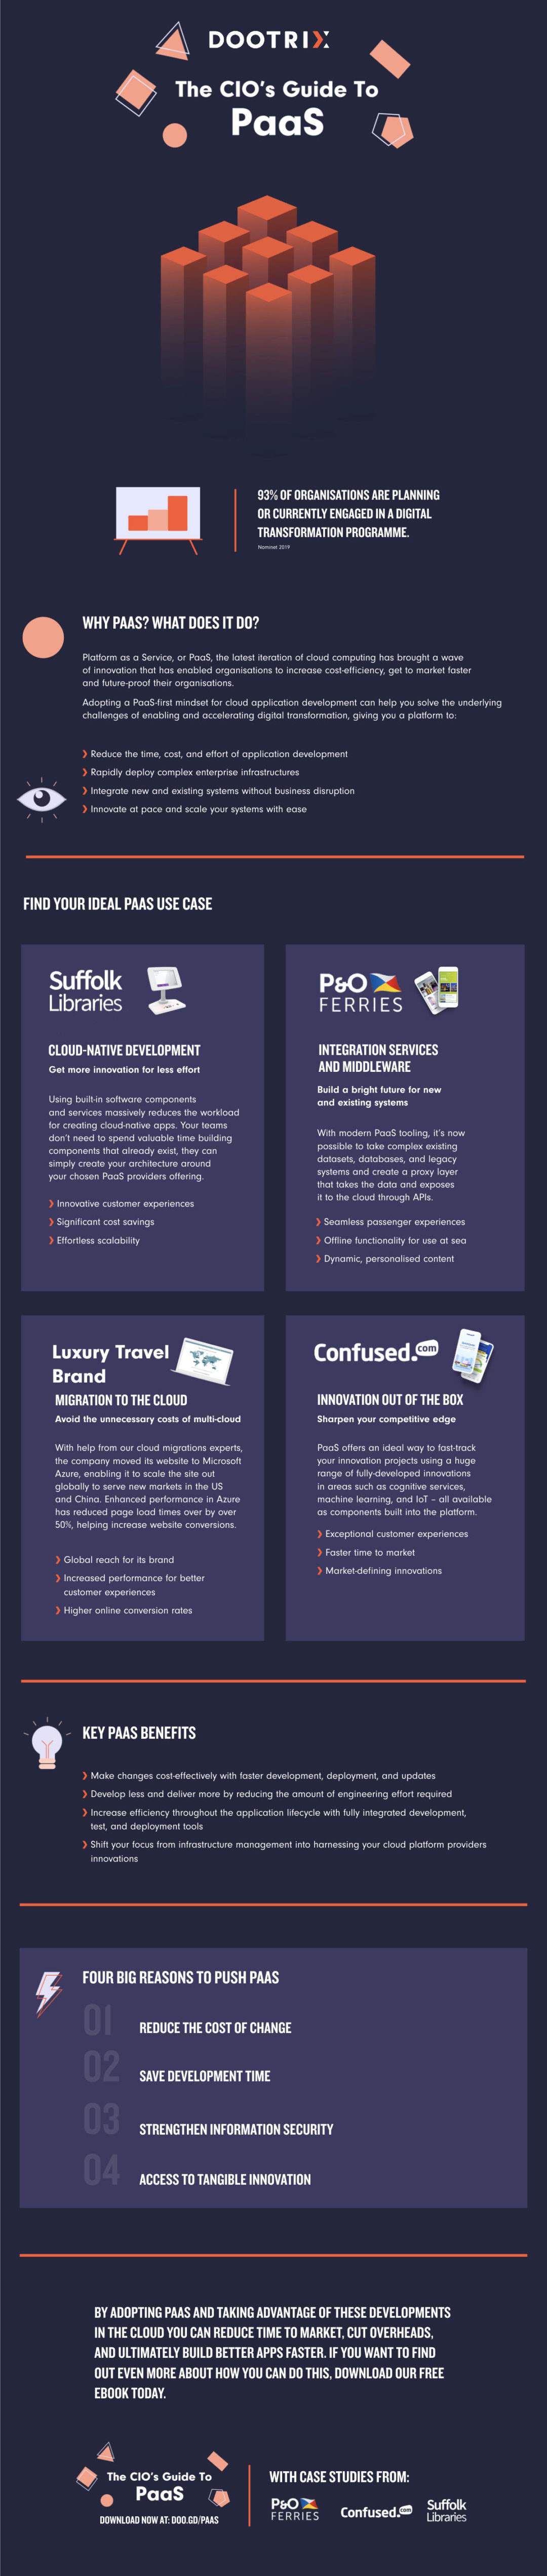 Infographic: CIO's Guide to PaaS